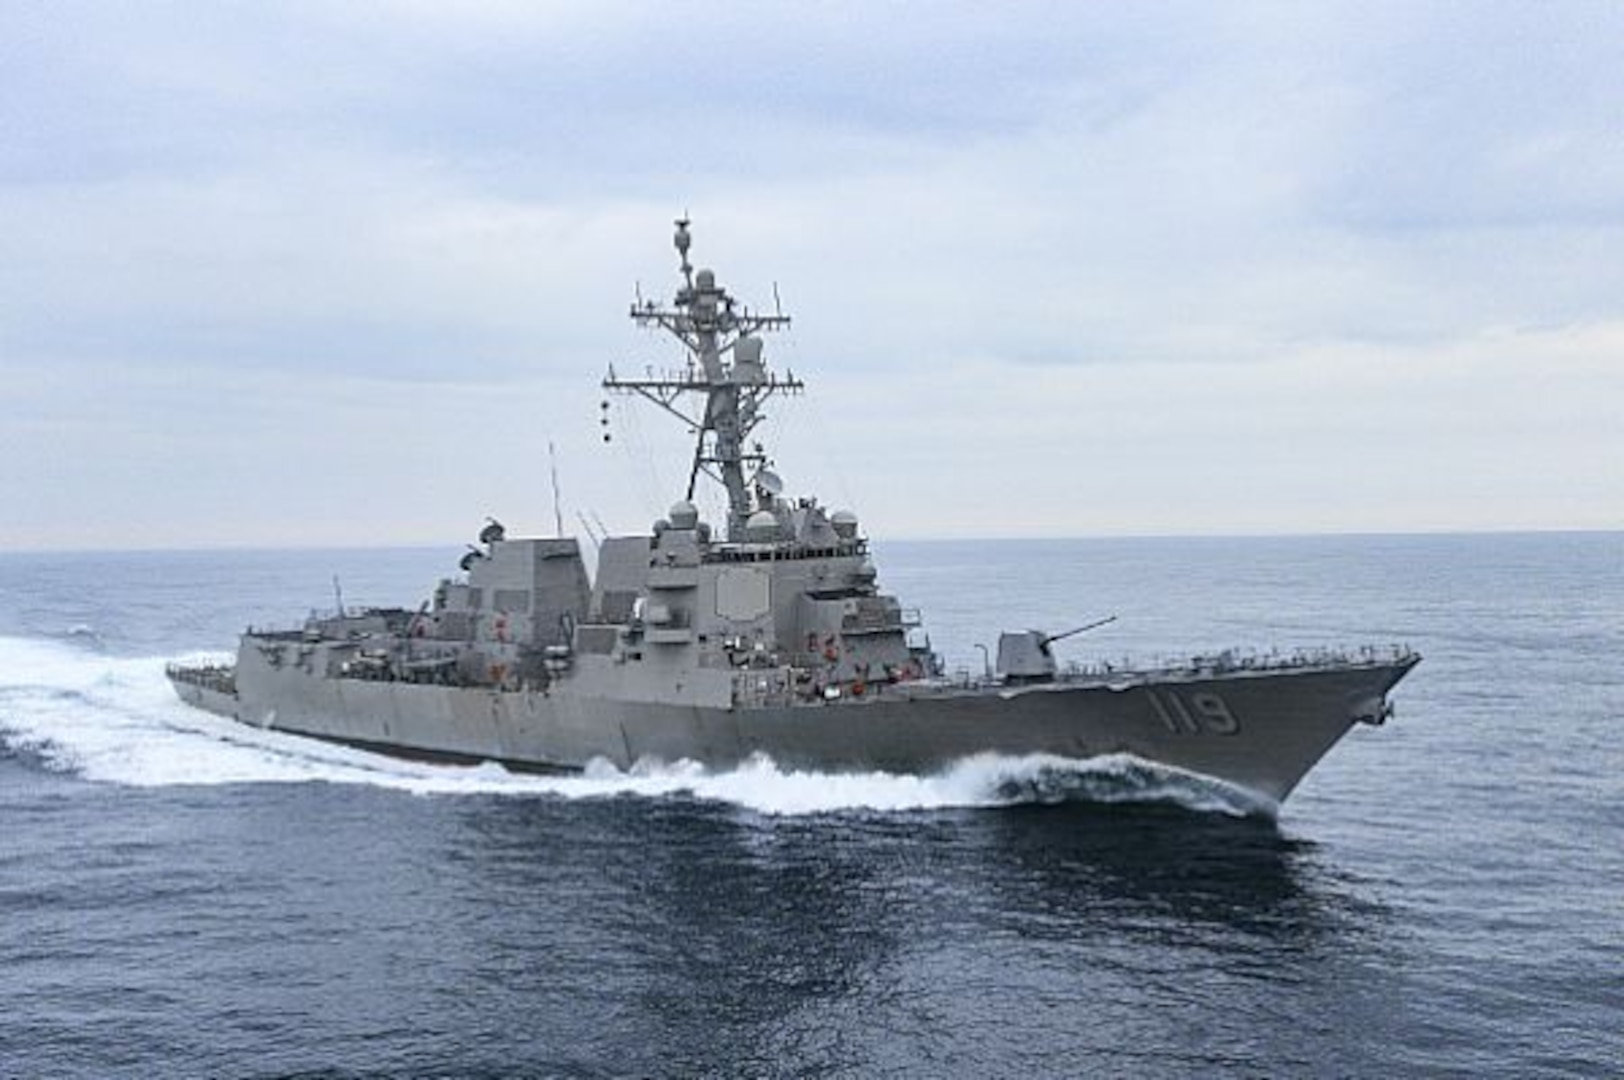 The  Arleigh Burke-class guided-missile destroyer Pre-Commissioning Unit (PCU) Delbert Black (DDG 119) conducts the second builder's trials in the Gulf of Mexico